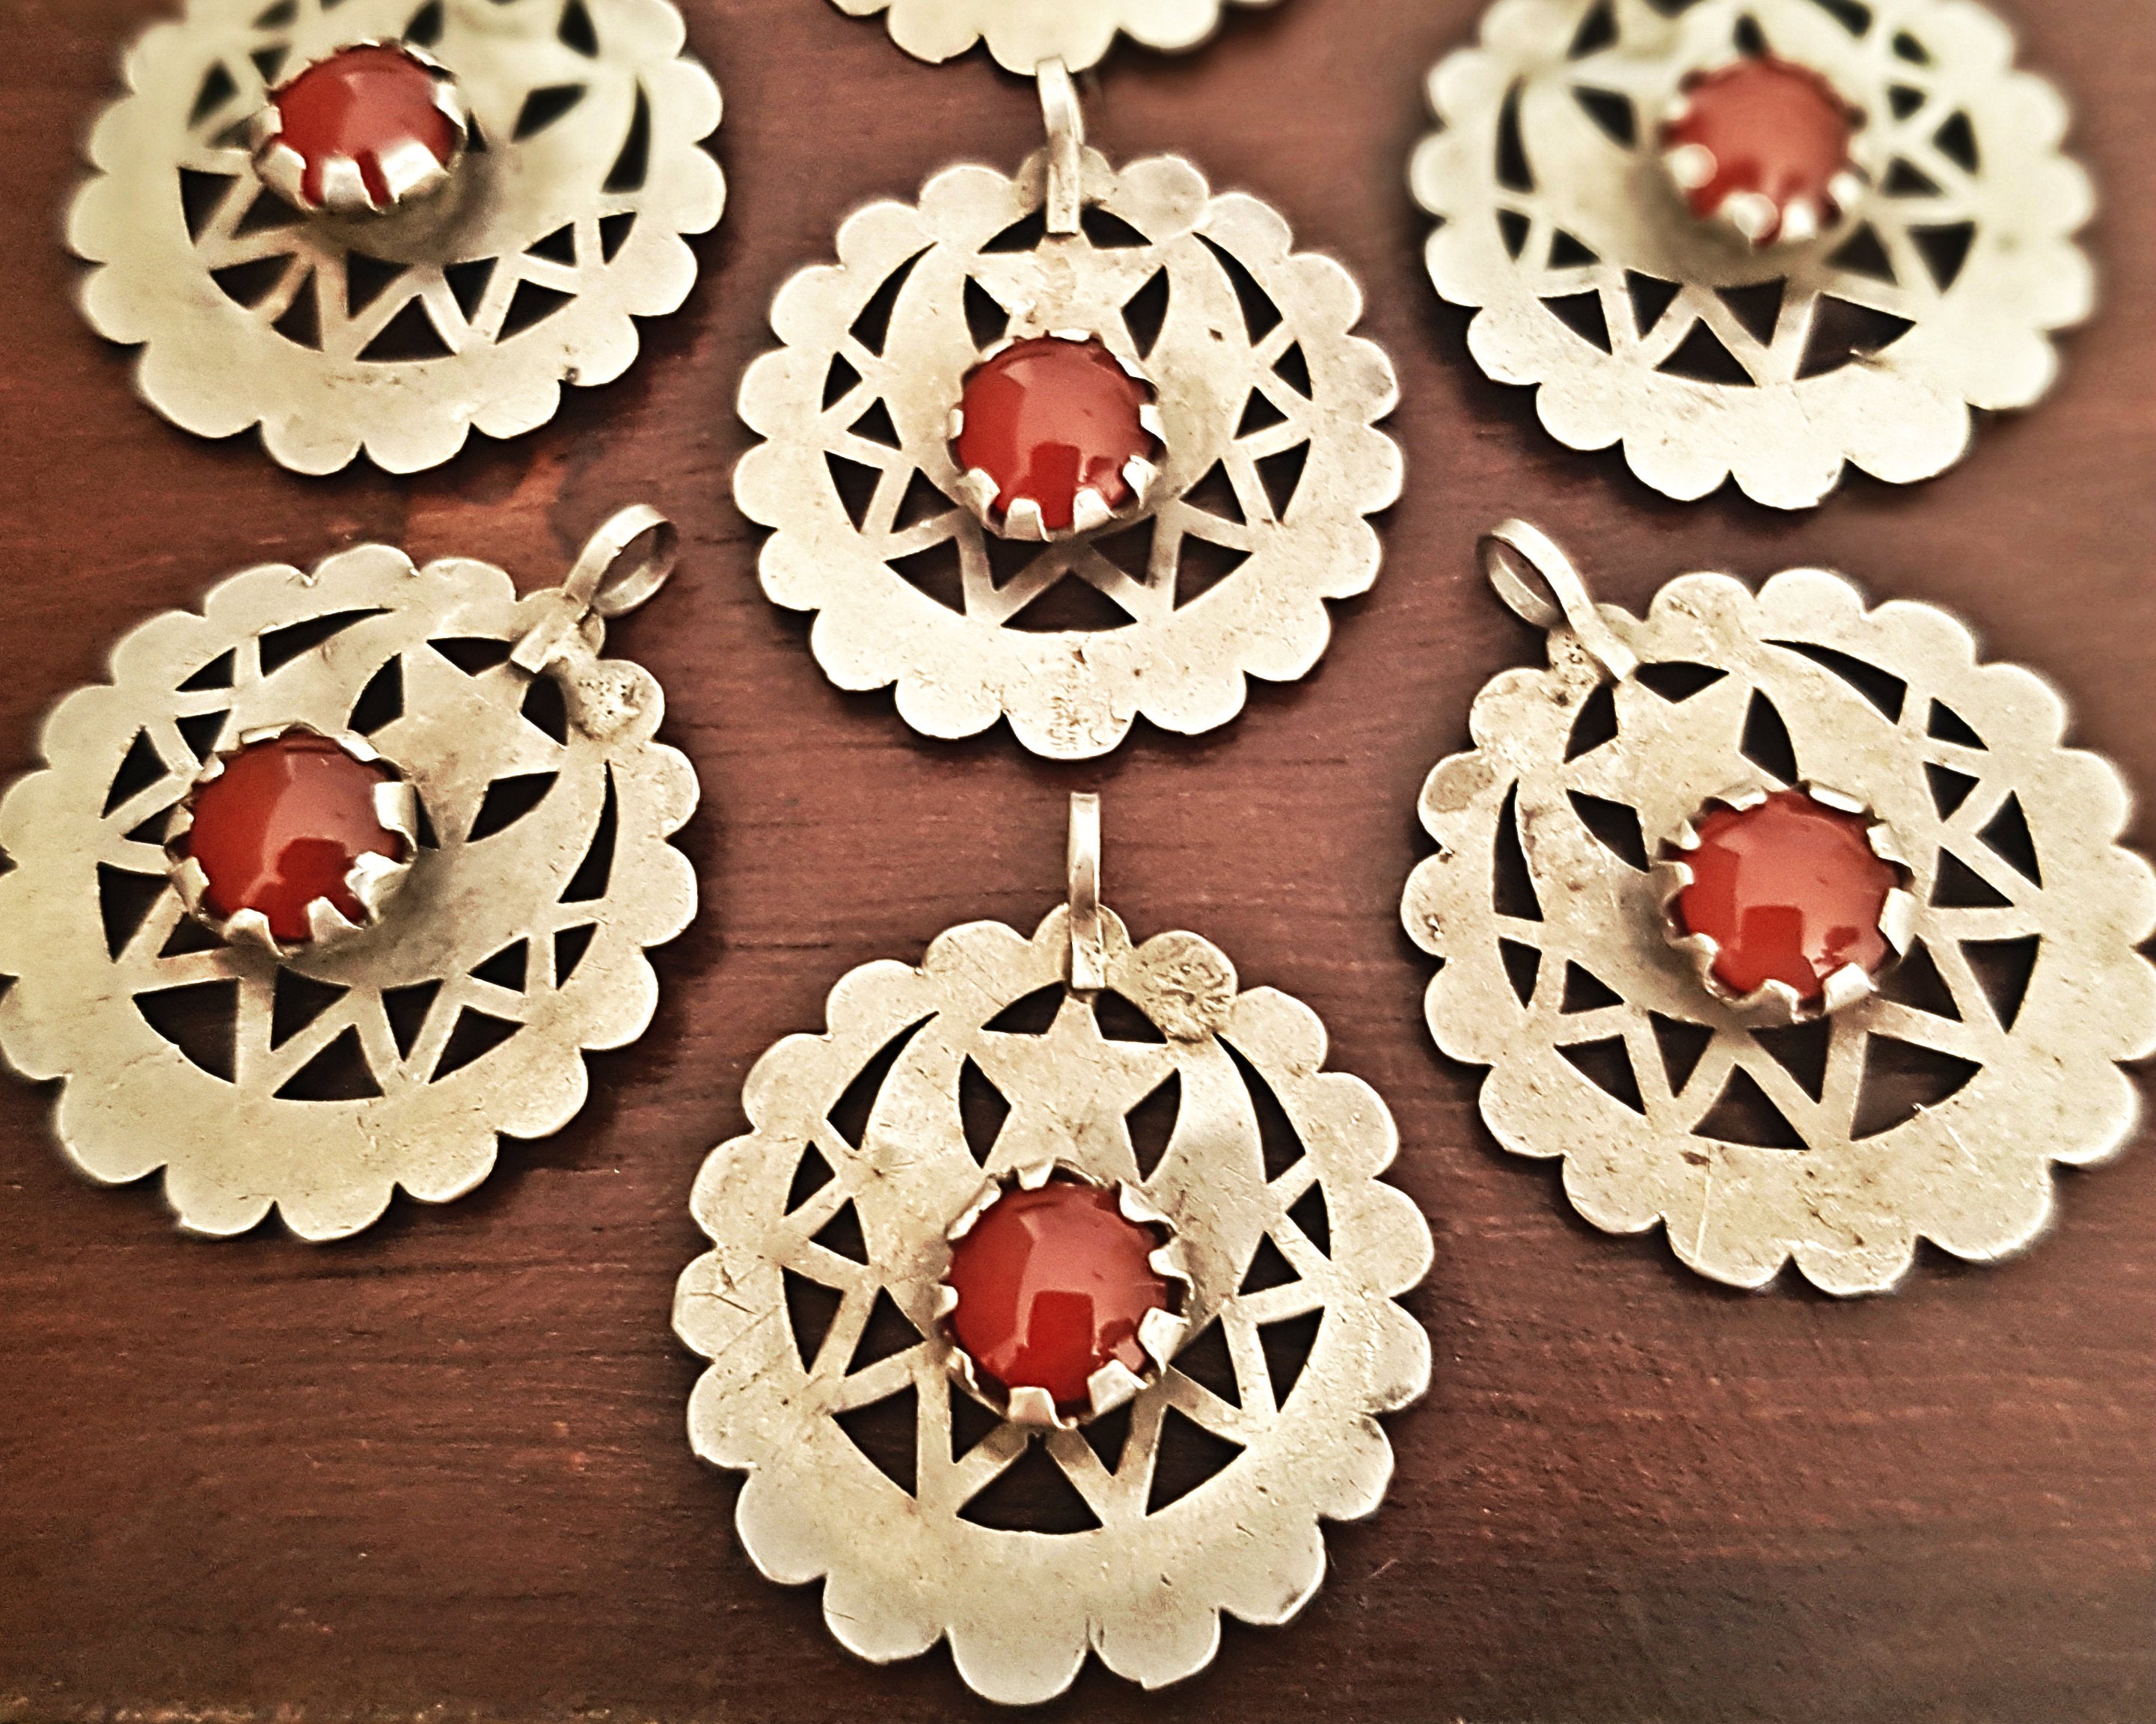 Afghani Crescent Moon Carnelian Pendants with Crescent Moon and Star